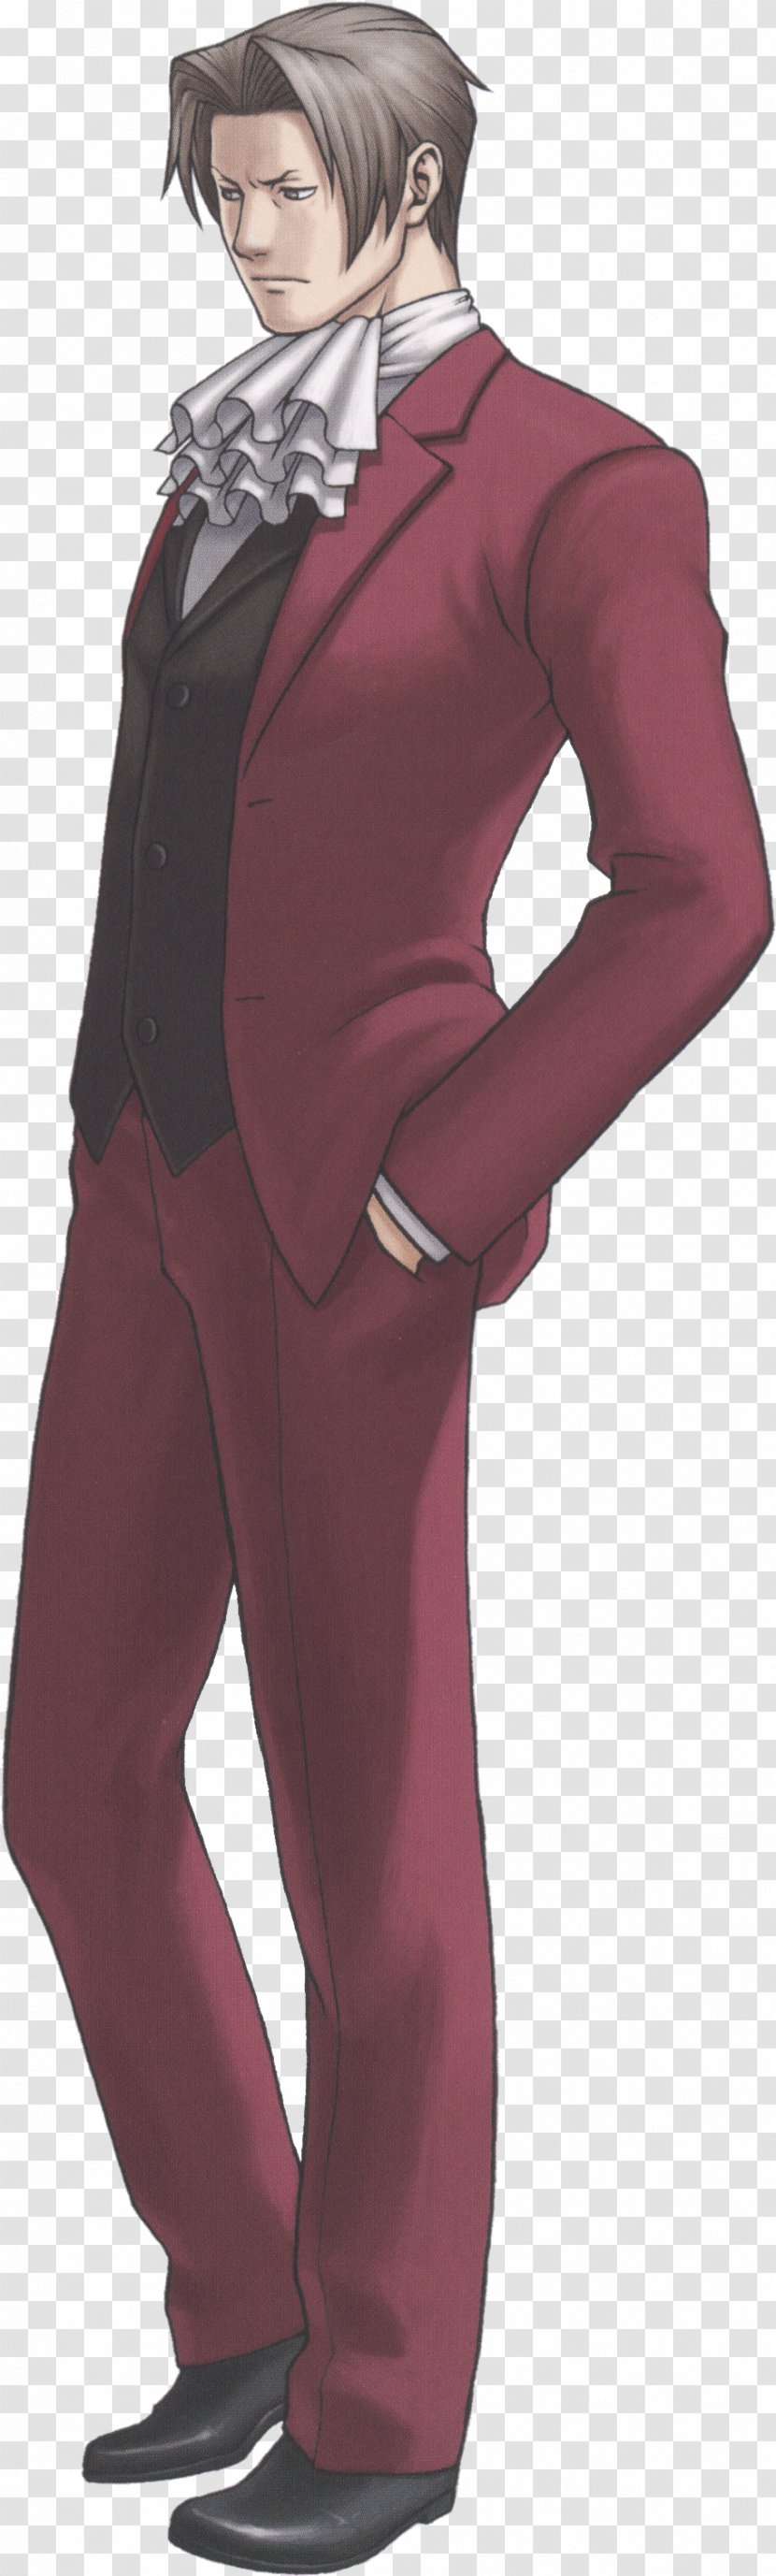 Professor Layton Vs. Phoenix Wright: Ace Attorney − Justice For All Investigations: Miles Edgeworth - Frame - Apollo Justice: Transparent PNG